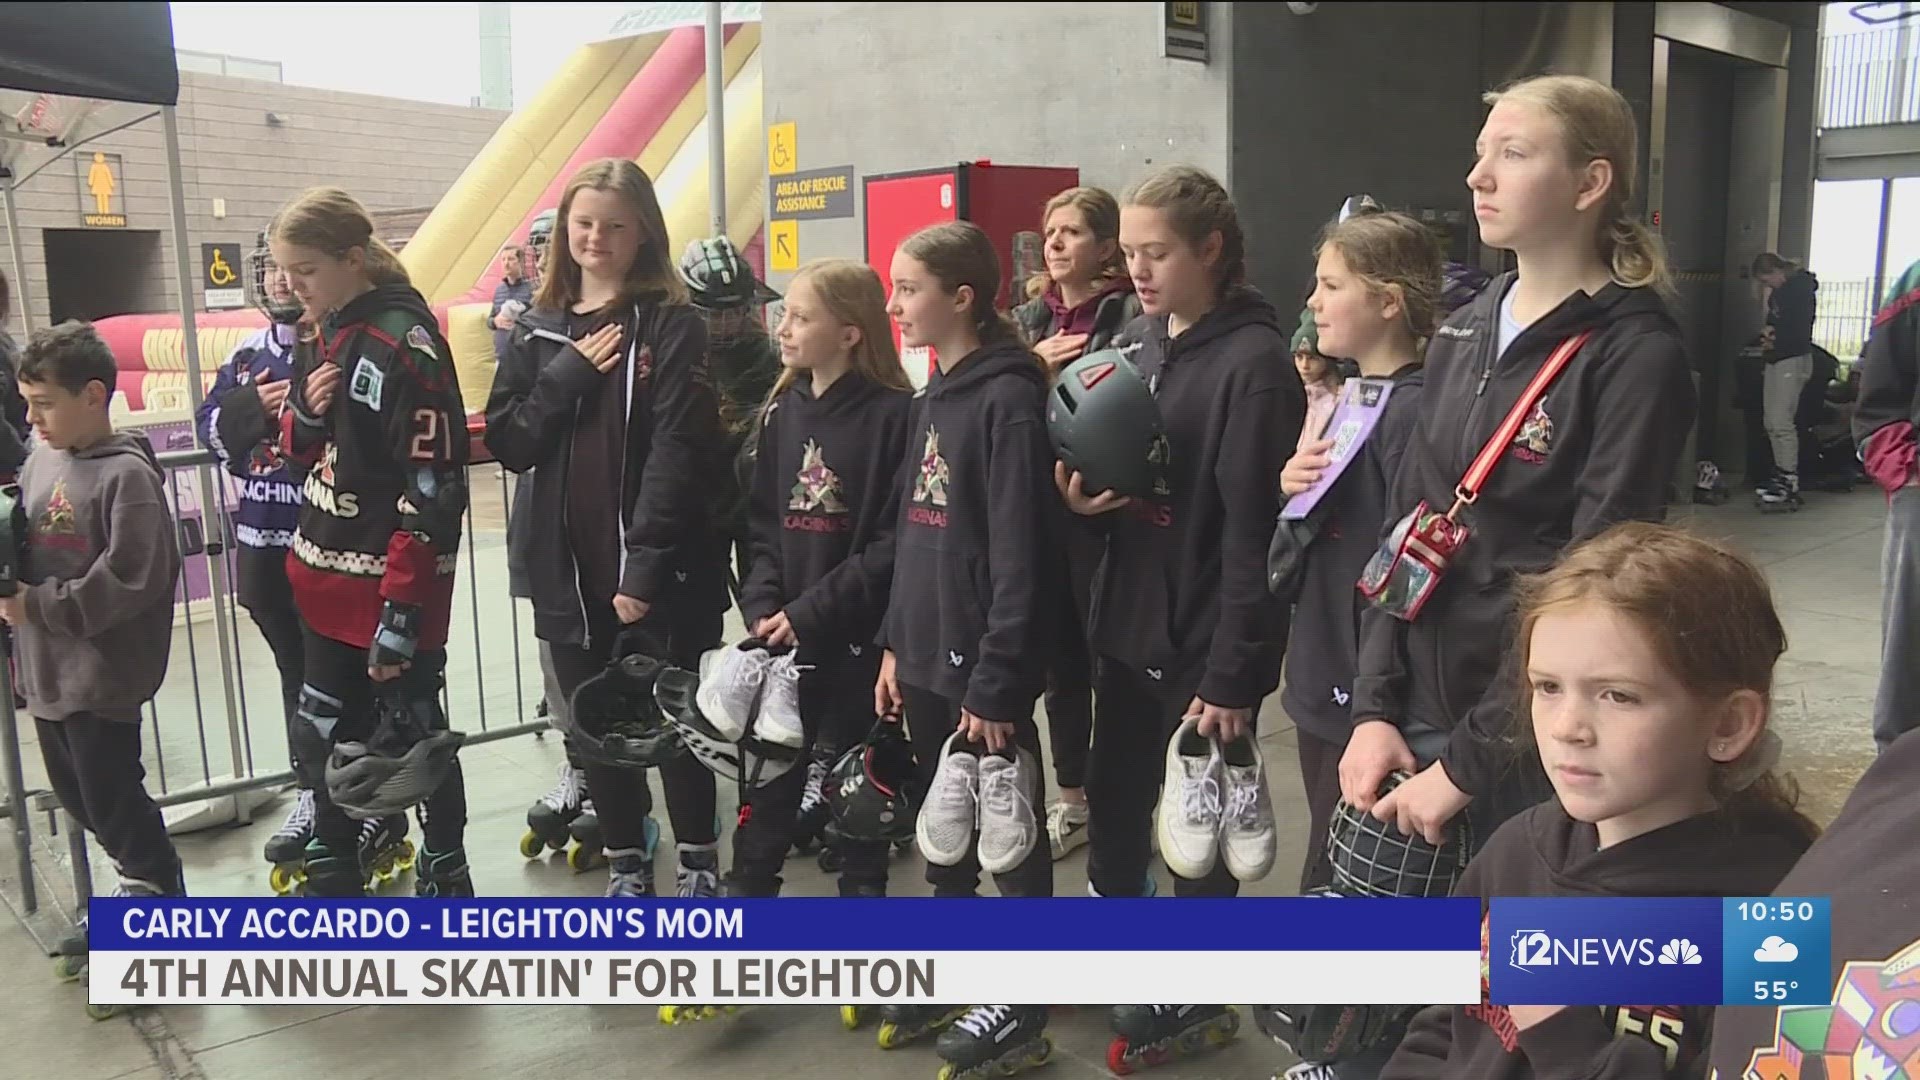 The Arizona Coyotes honored Leighton Accardo, who passed away in 2020, by raising money to help other girls play hockey at the 4th annual 'Skatin' for Leighton'